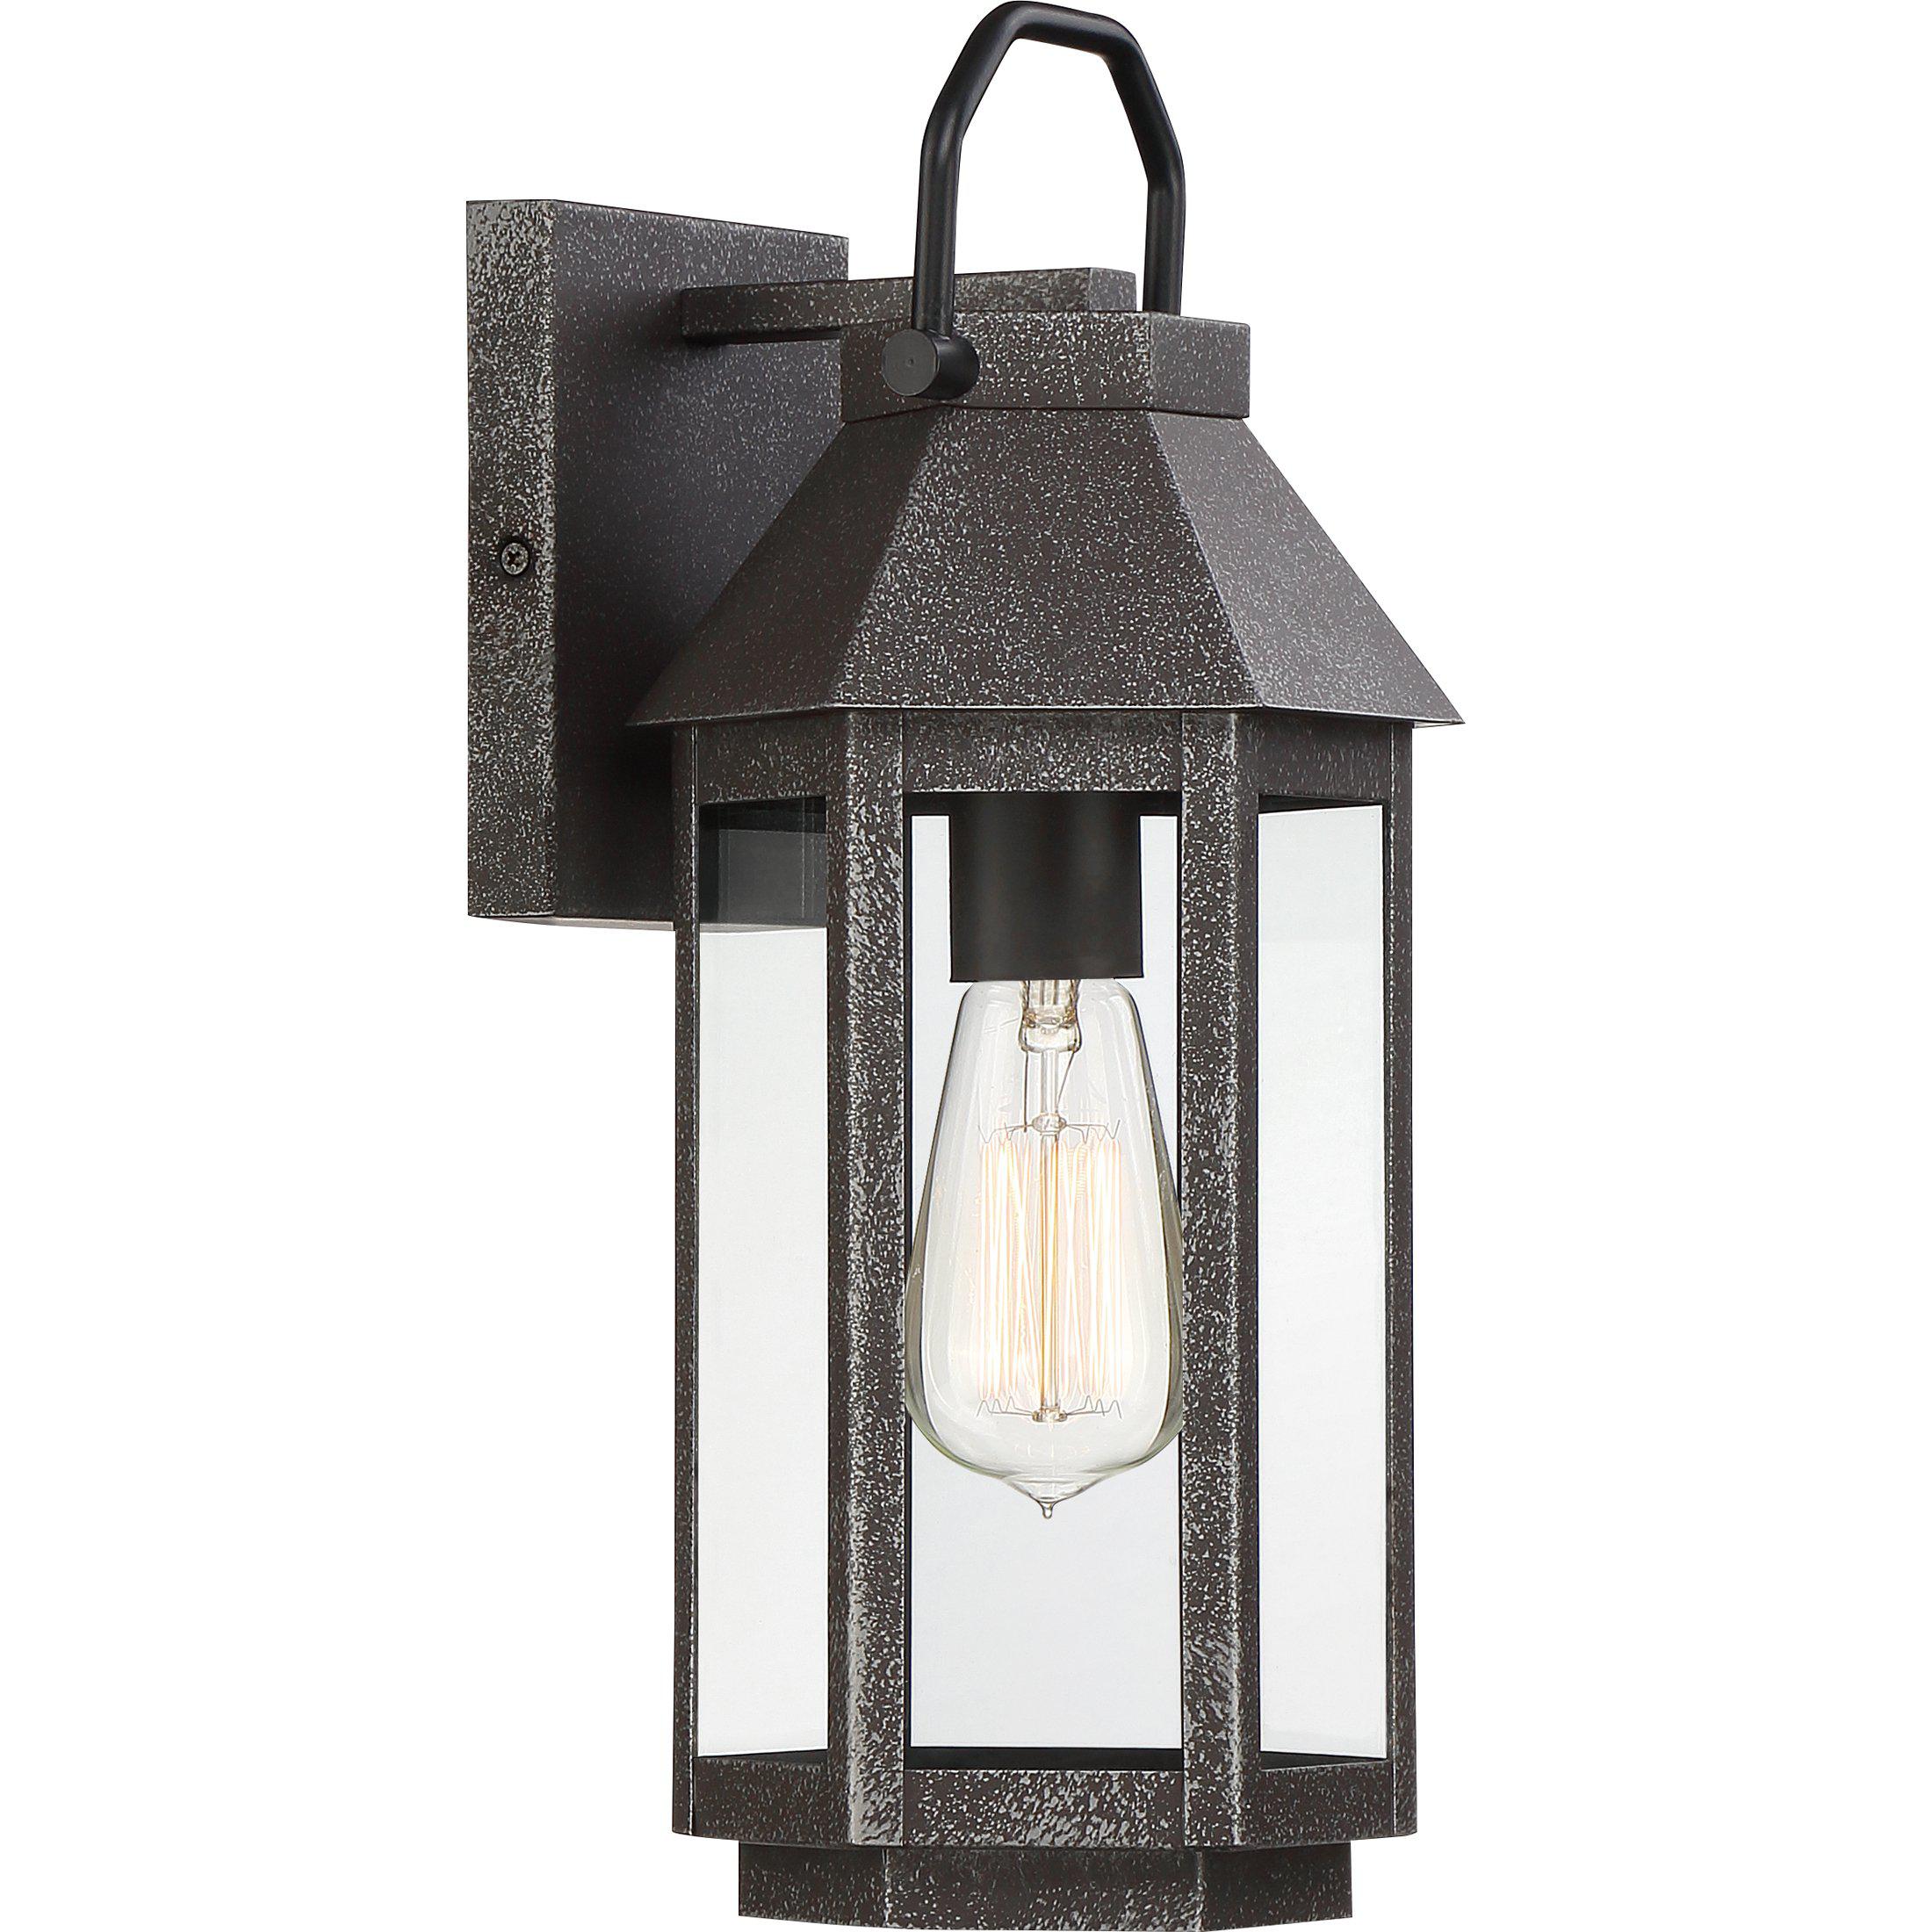 Quoizel  Campbell Outdoor Lantern, Small Outdoor l Wall Quoizel Speckled Black  